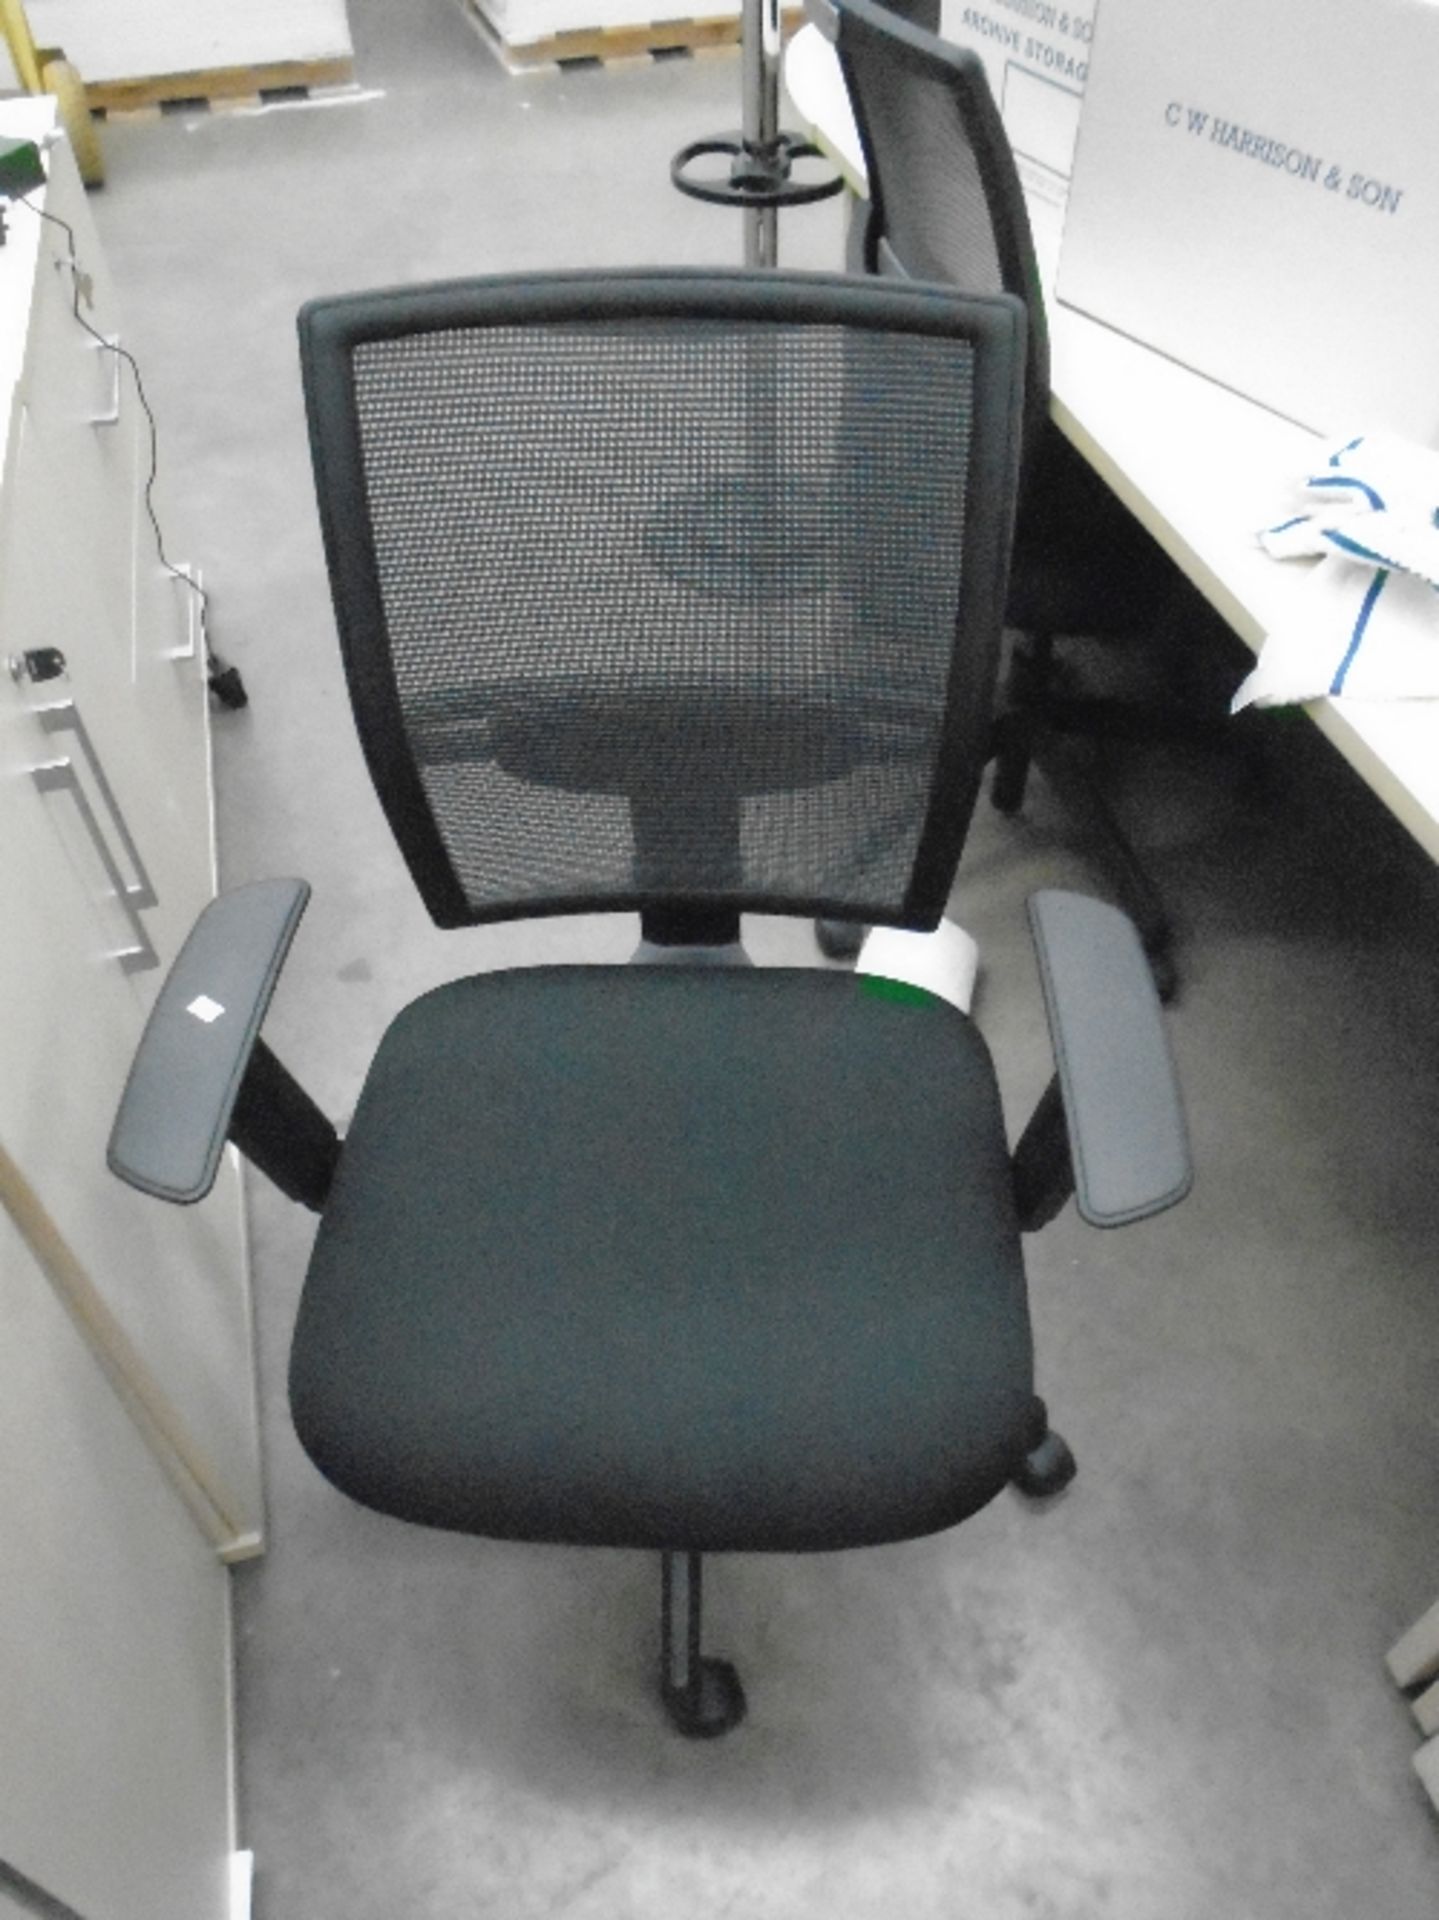 A Vector black upholstered operators swivel arm chair with netted back support